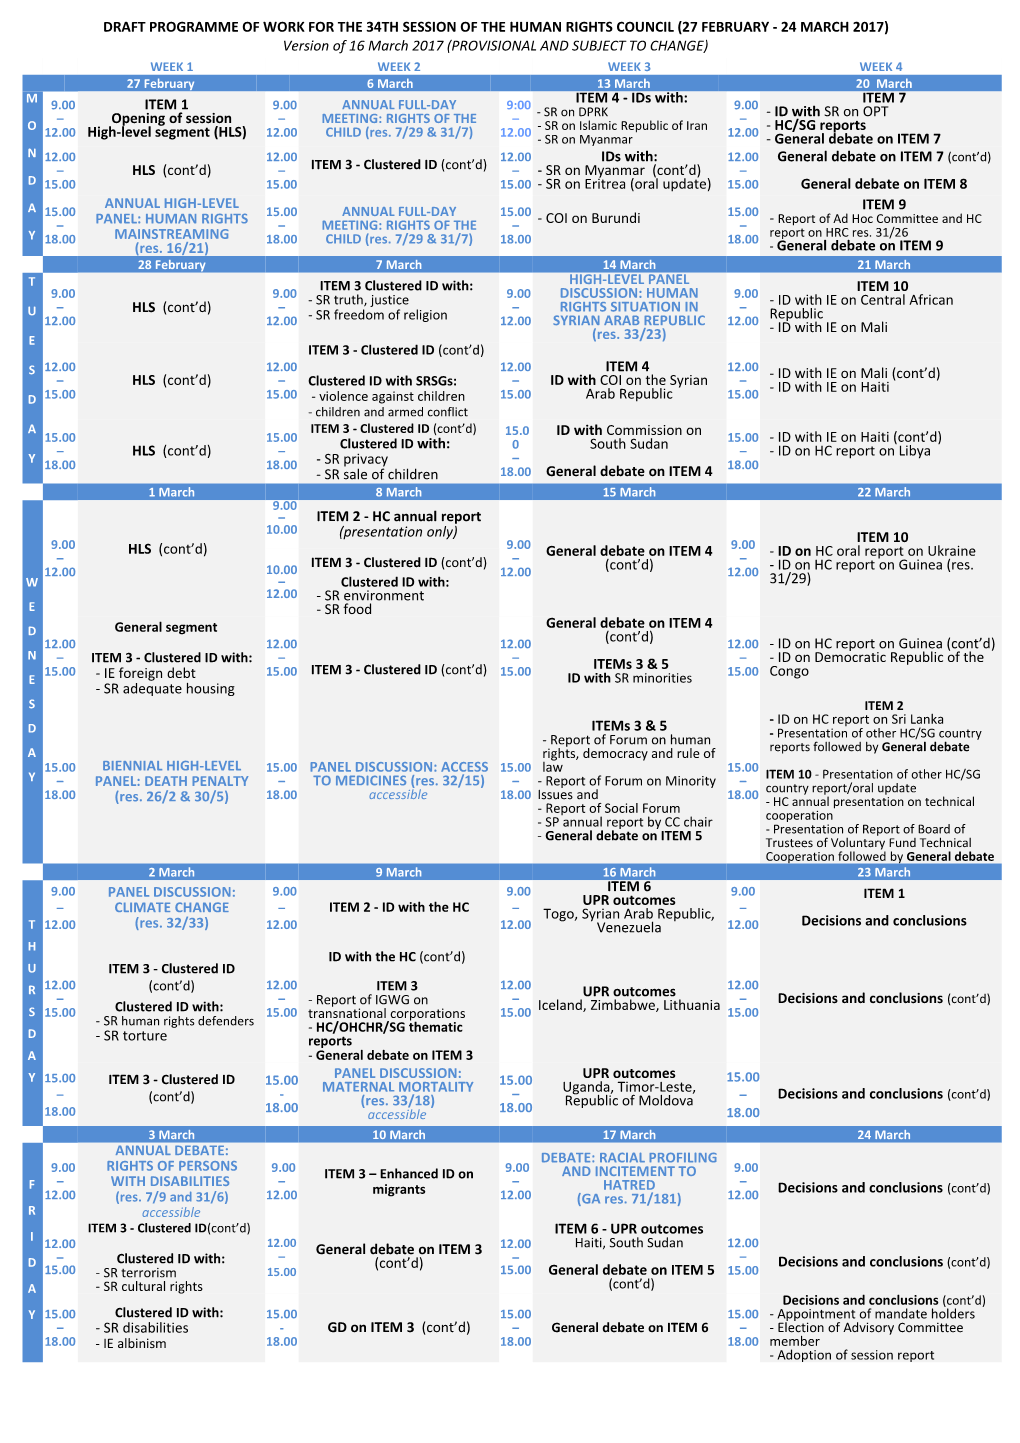 PROGRAMME of WORK for the 34Th SESSION of the HUMAN RIGHTS COUNCIL